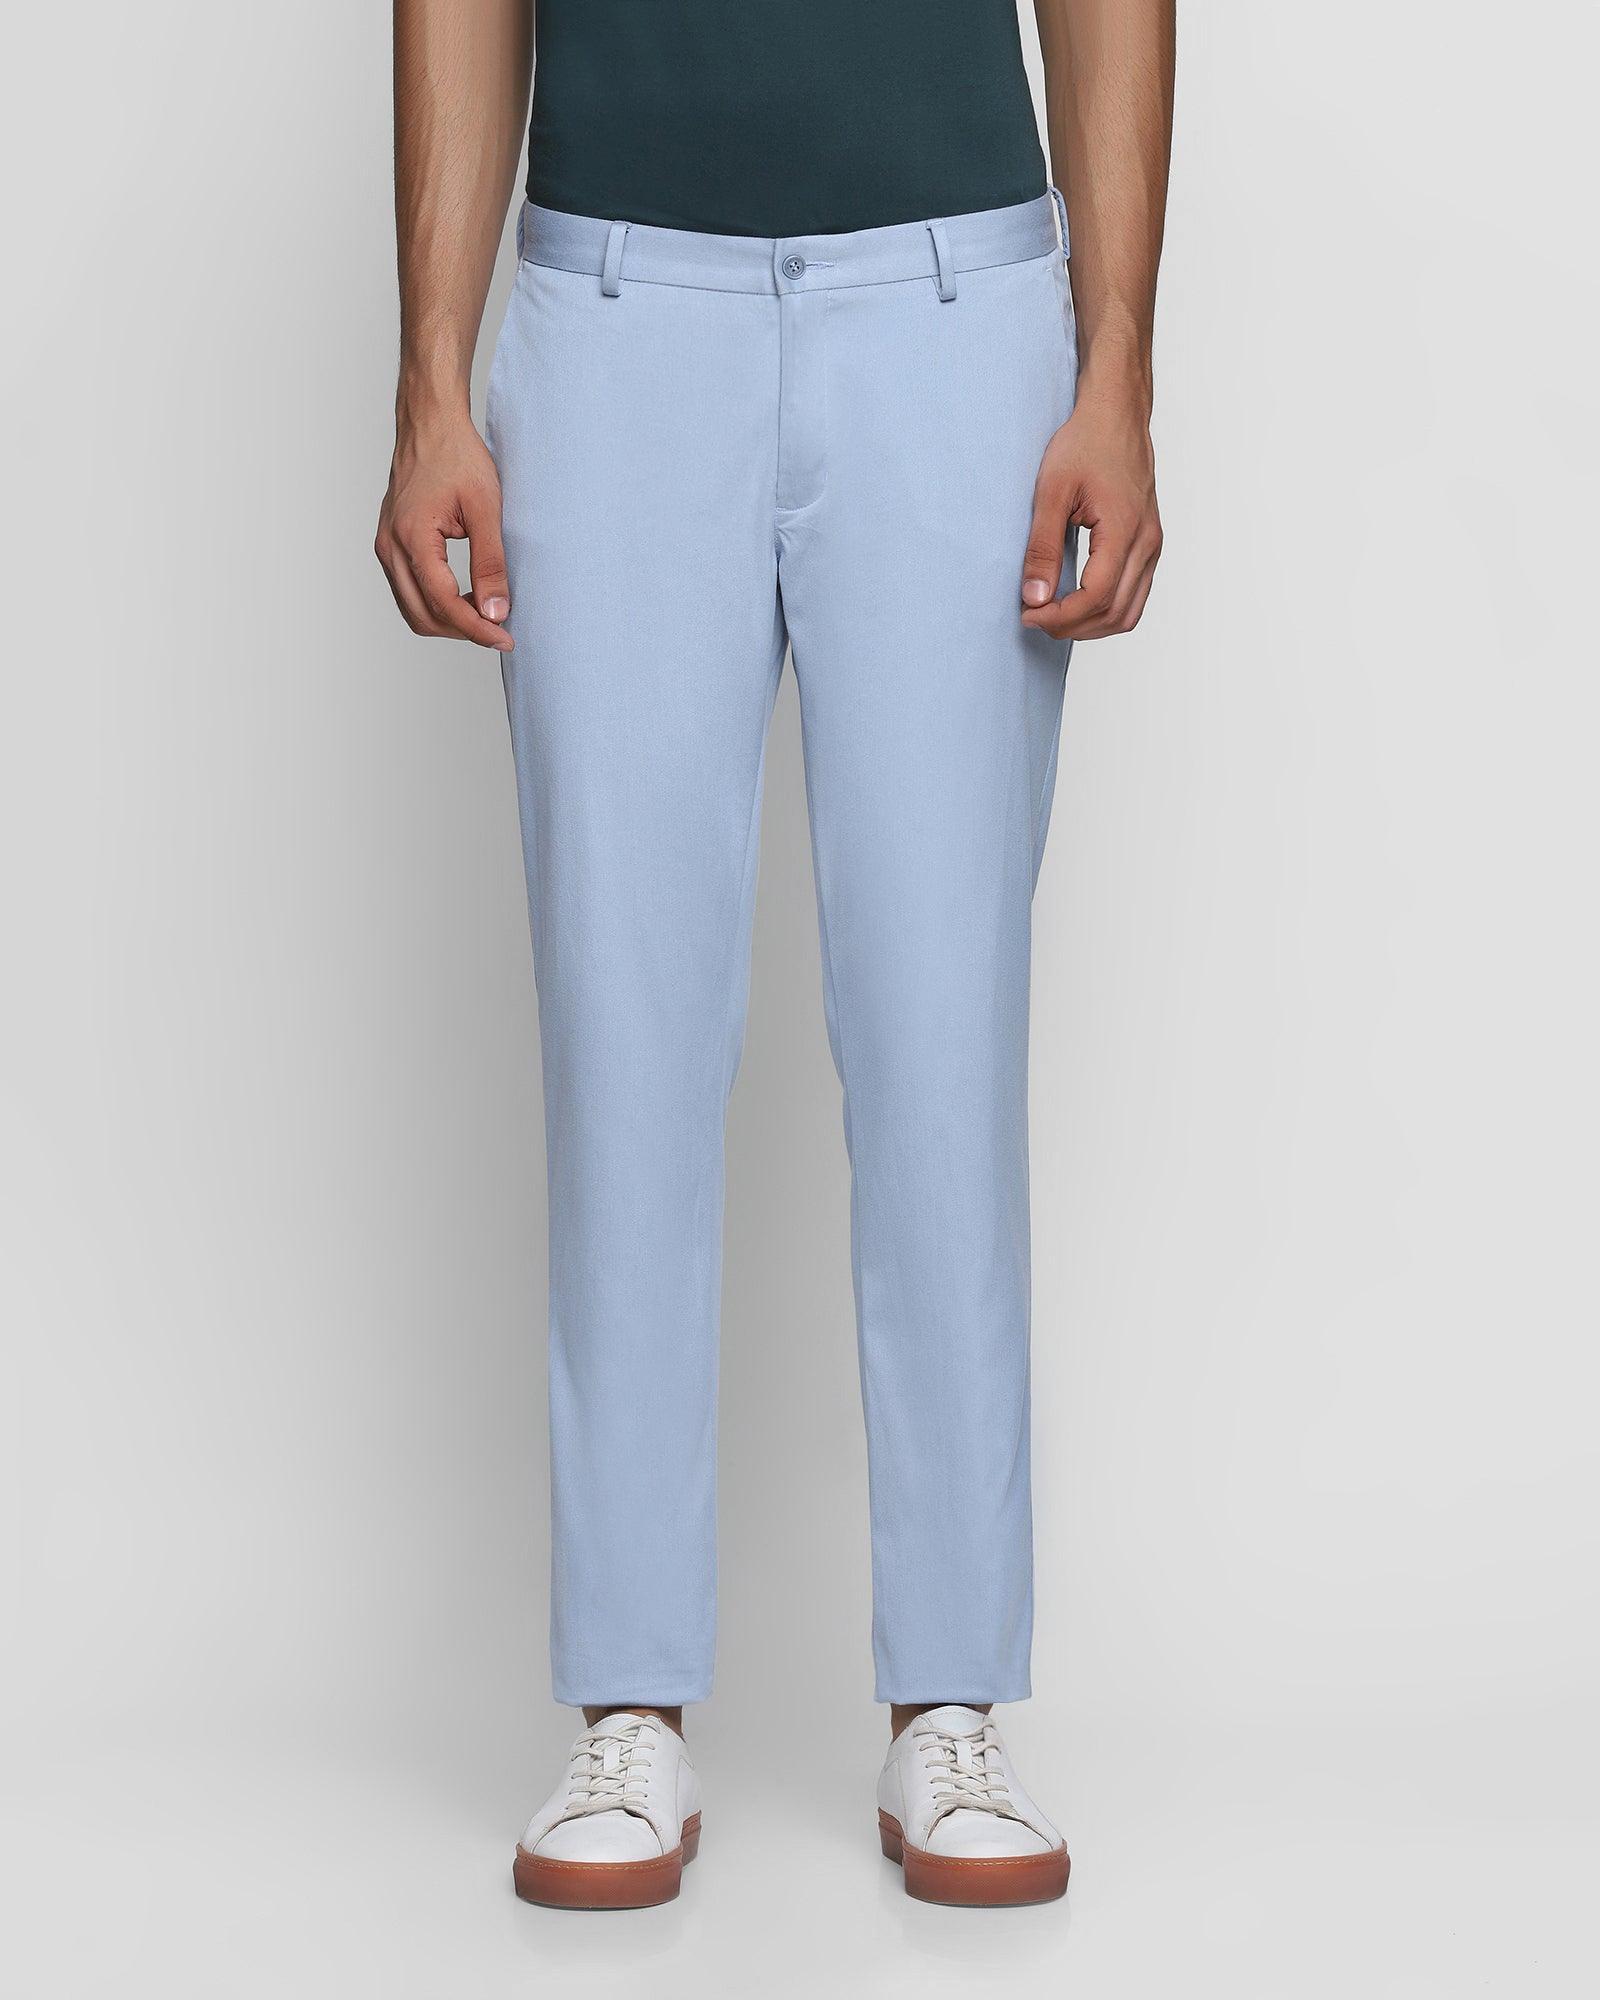 slim fit b-91 casual sky blue solid khakis - aiden